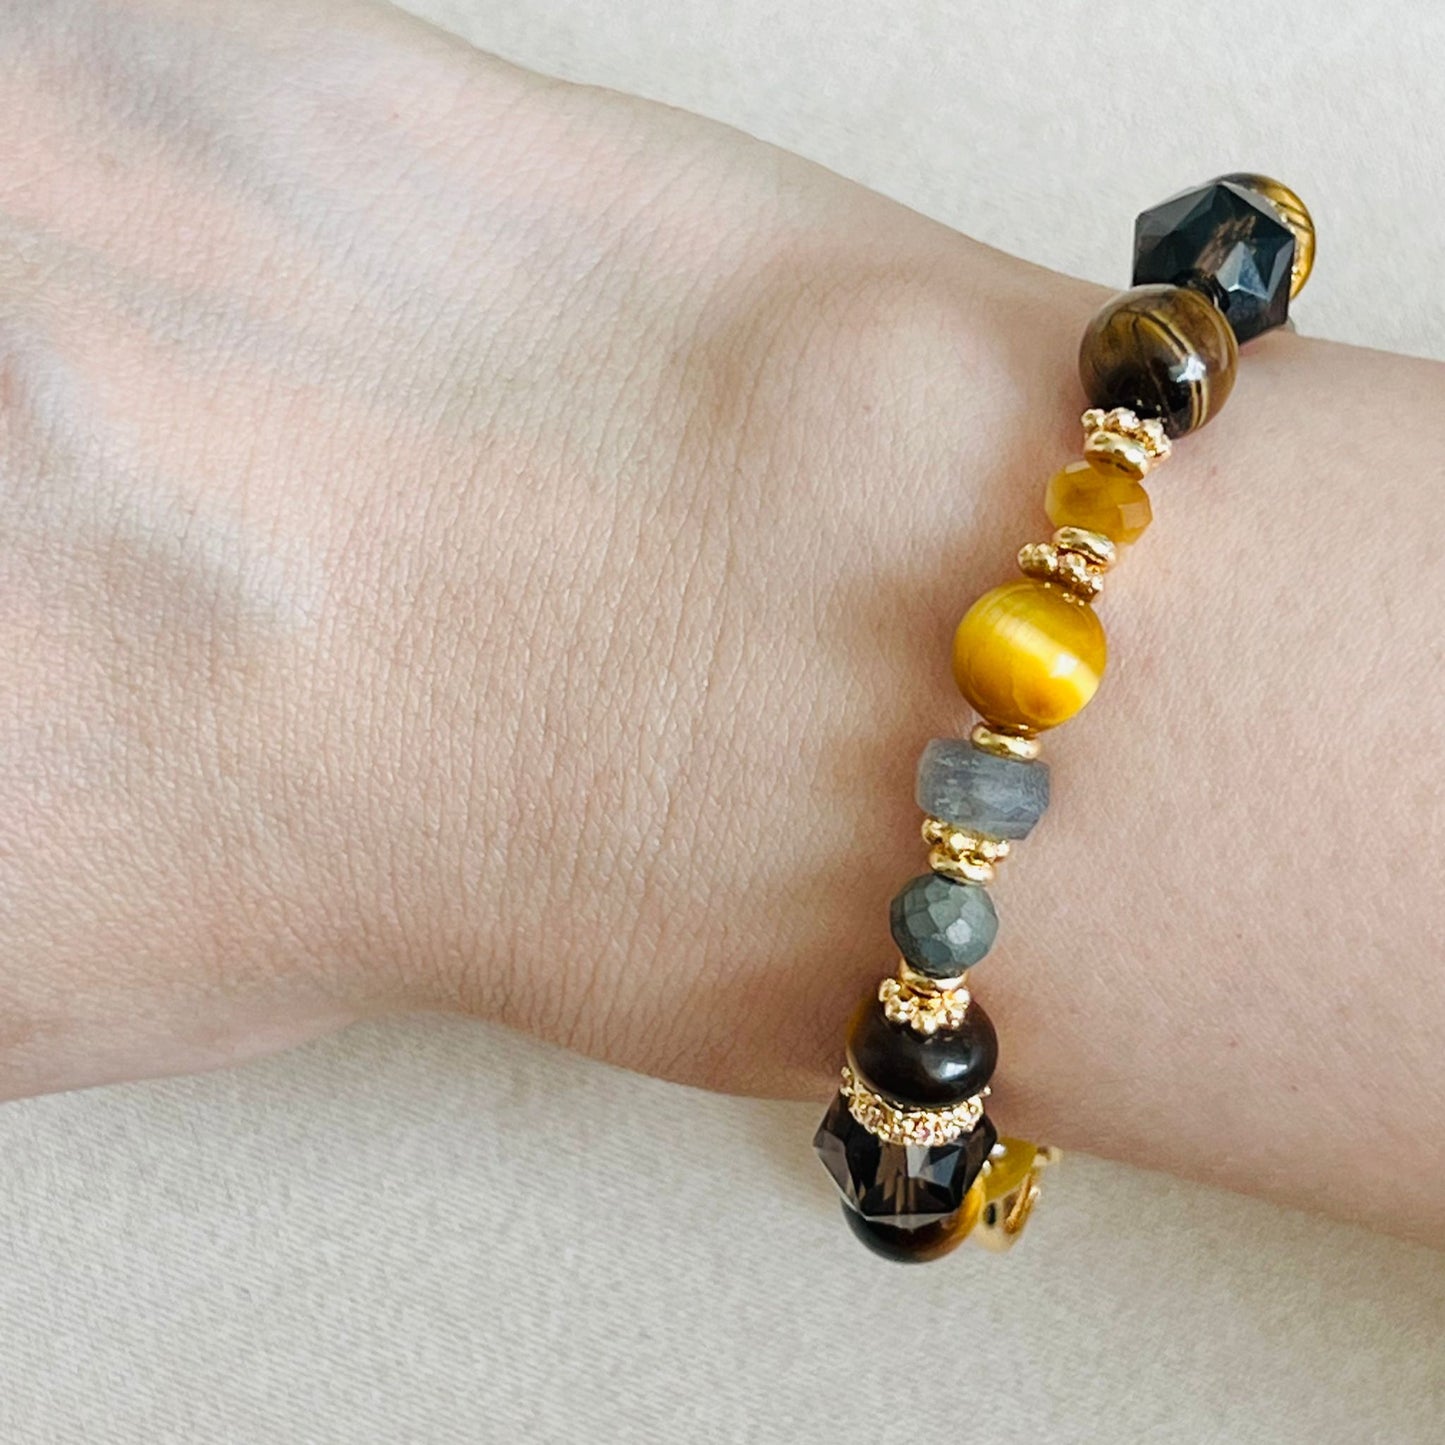 Looking For Steadiness, Strength & Power Bracelet